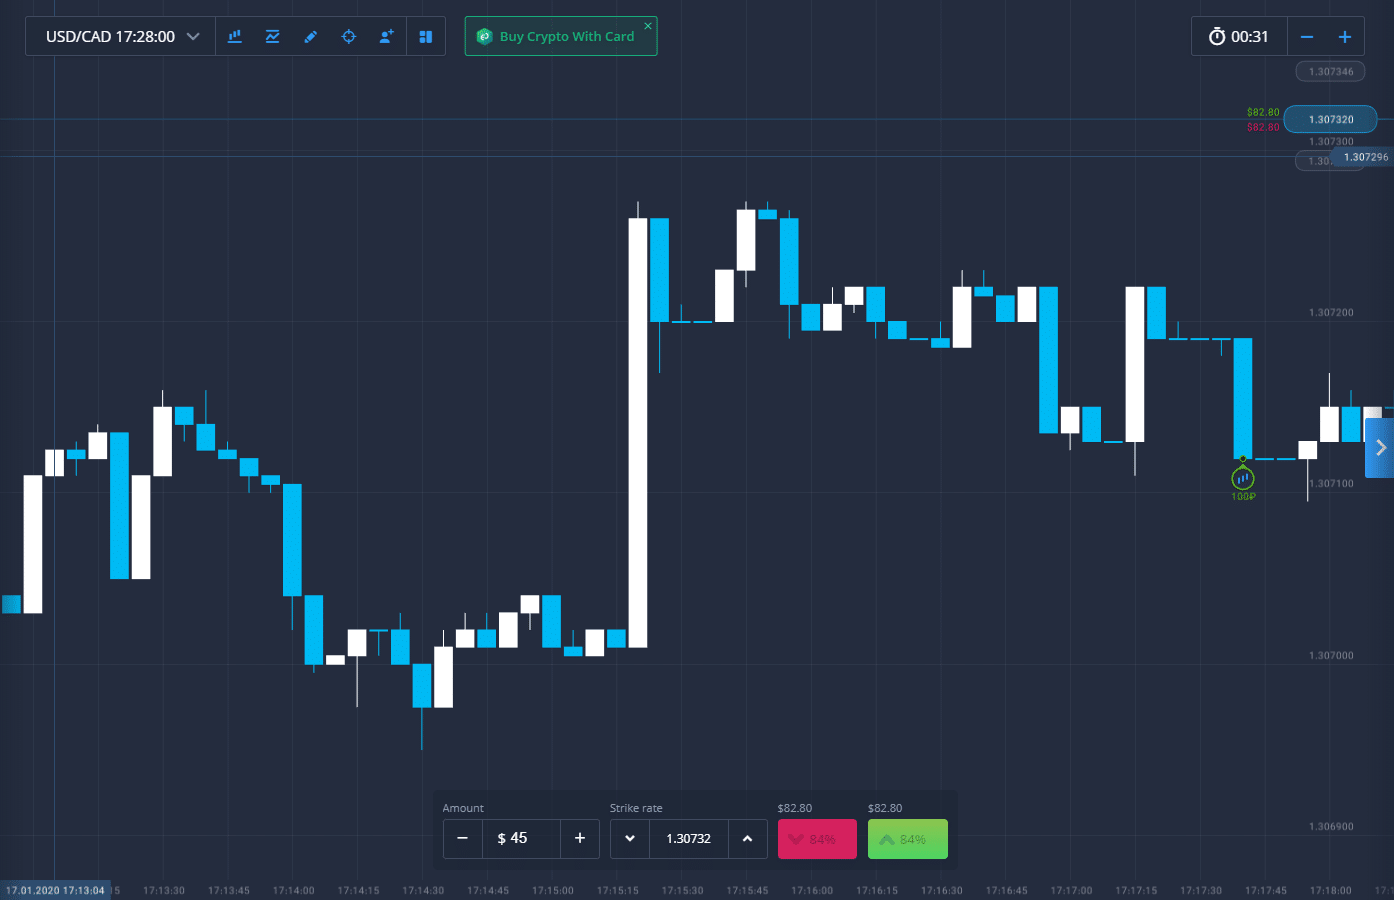 Charting and technical analysis is possible with ExpertOption